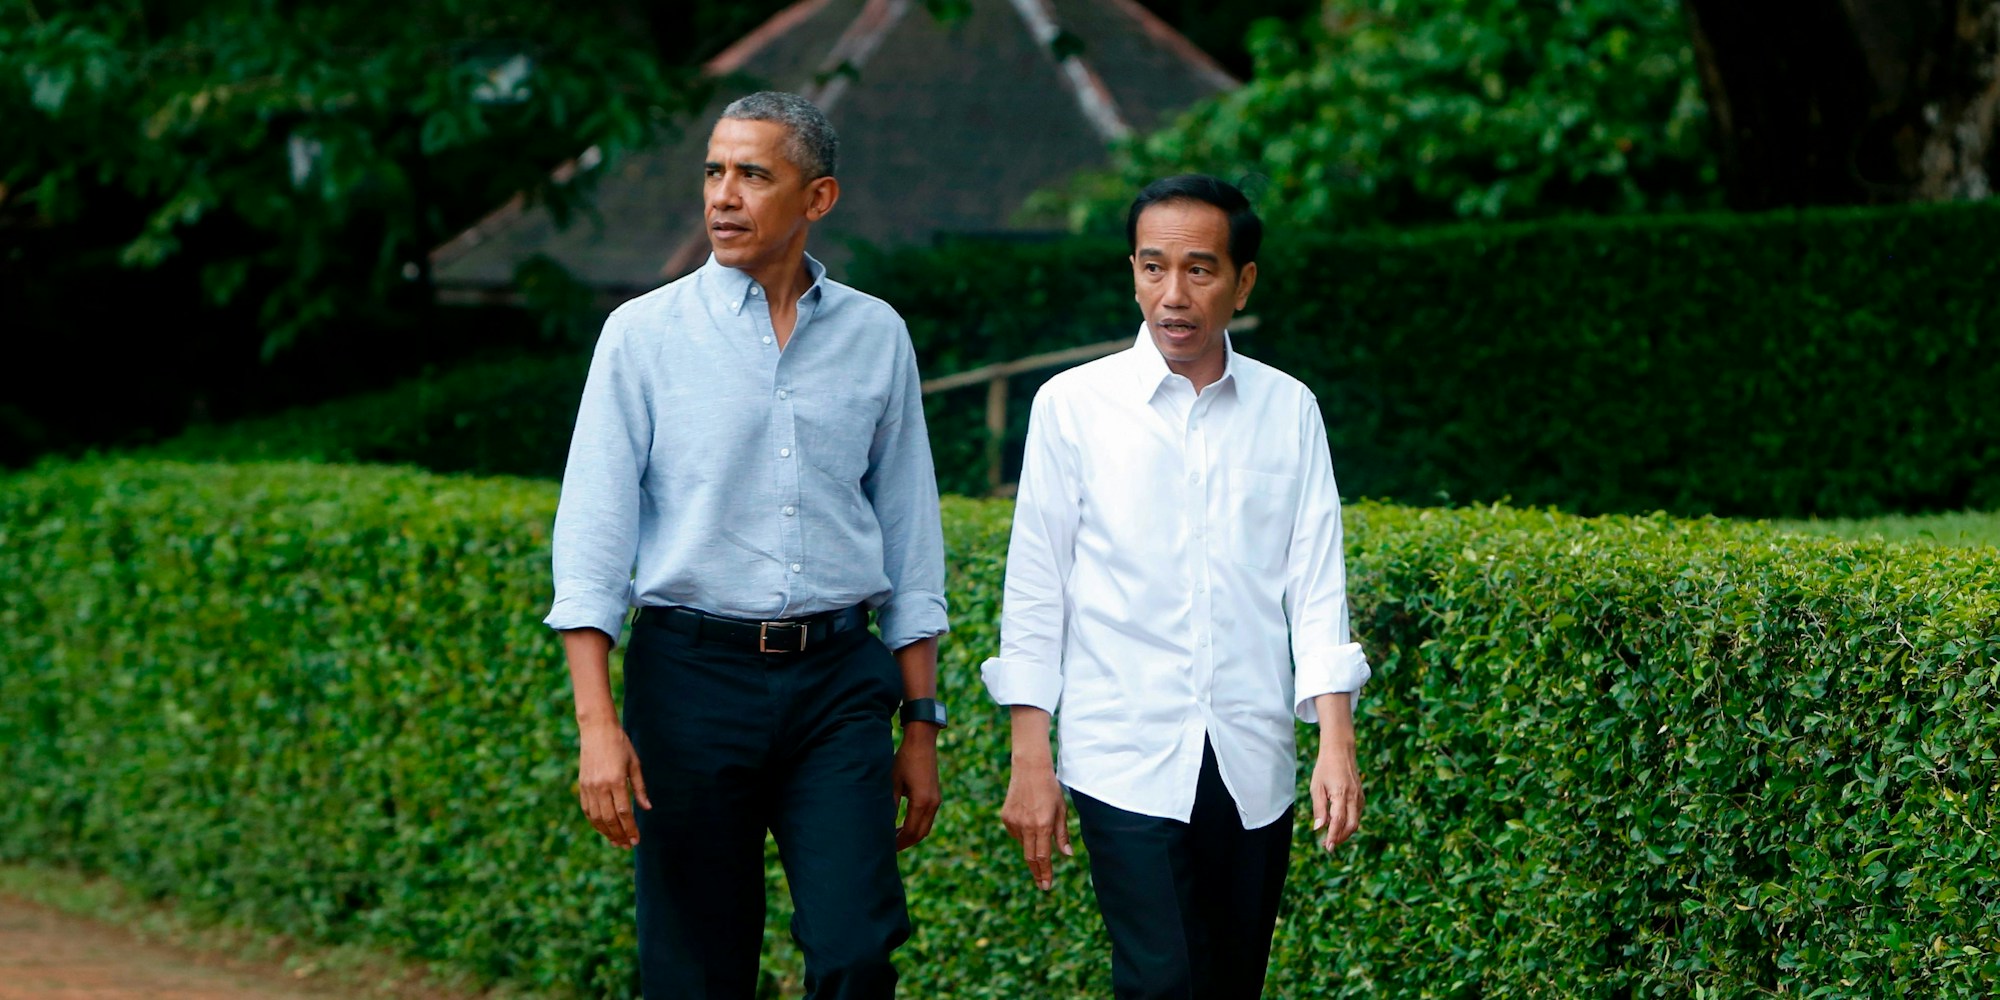 Former US president Barack Obama (L) walks next to Indonesian President Joko Widodo (R) during their a visit at the Botanical Garden adjacent to the Presidential Palace complex in Bogor on June 30, 2017. Obama is currently on a 10-day family holiday in Indonesia that will take take him to Bali and Jakarta, the city where he spent part of his childhood, officials said. / AFP PHOTO / POOL / ADI WEDA (Photo credit should read ADI WEDA/AFP via Getty Images)